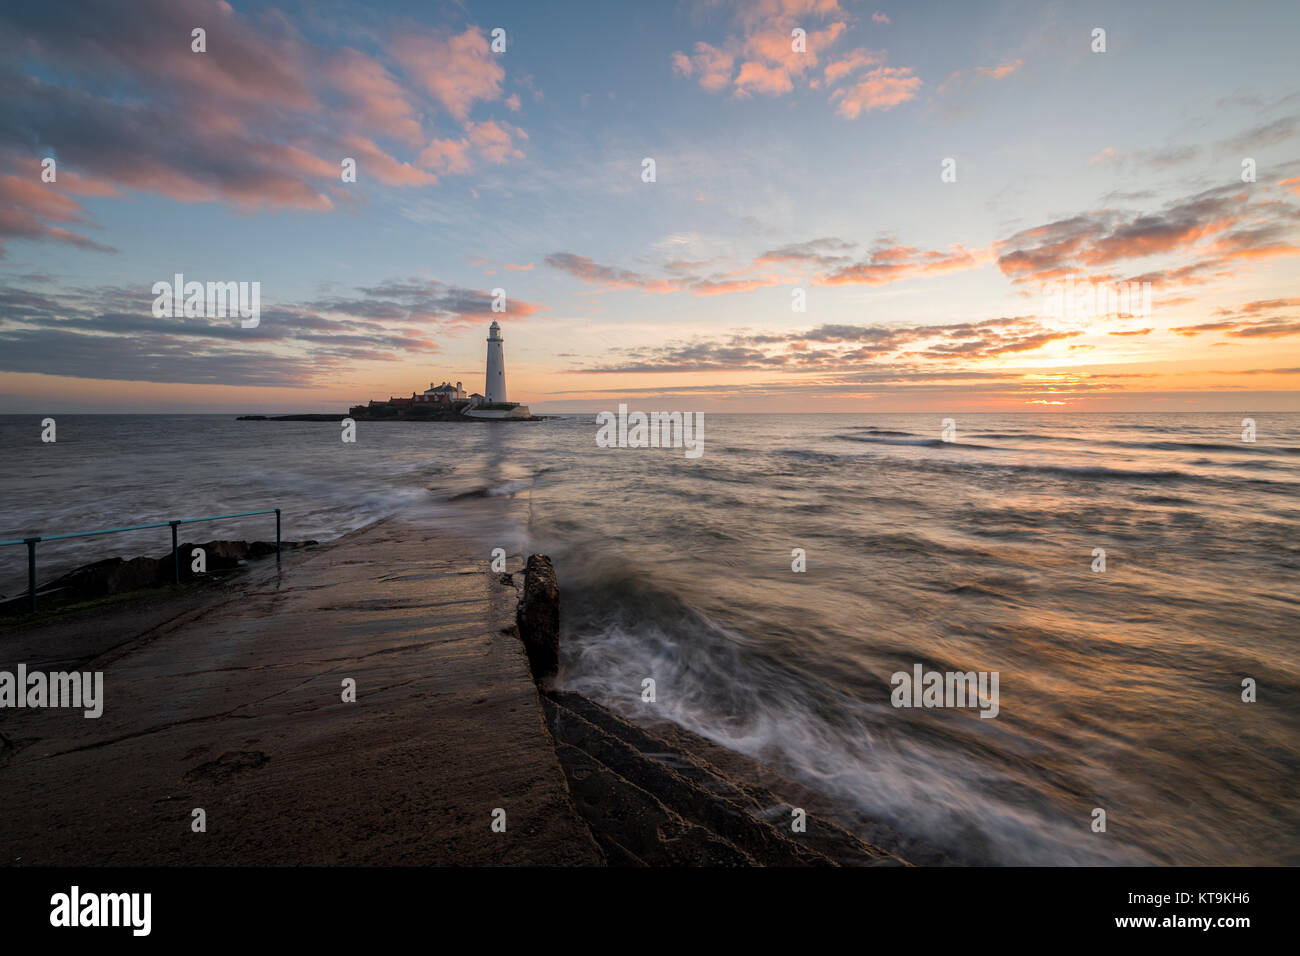 St Mary's Lighthouse in Tyne & Wear. Stock Photo